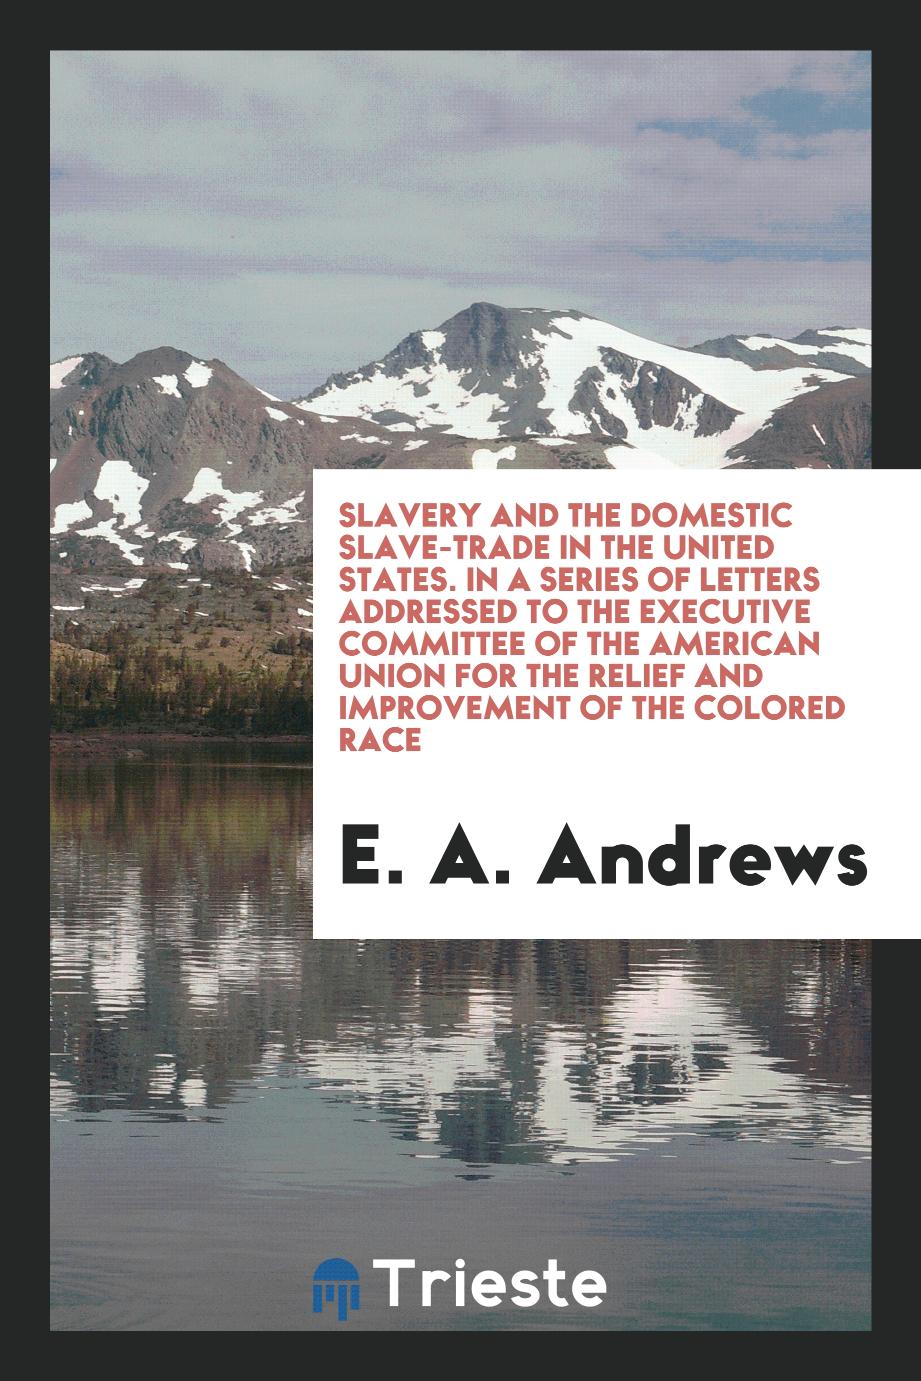 Slavery and the domestic slave-trade in the United States. In a series of letters addressed to the Executive committee of the American union for the relief and improvement of the colored race